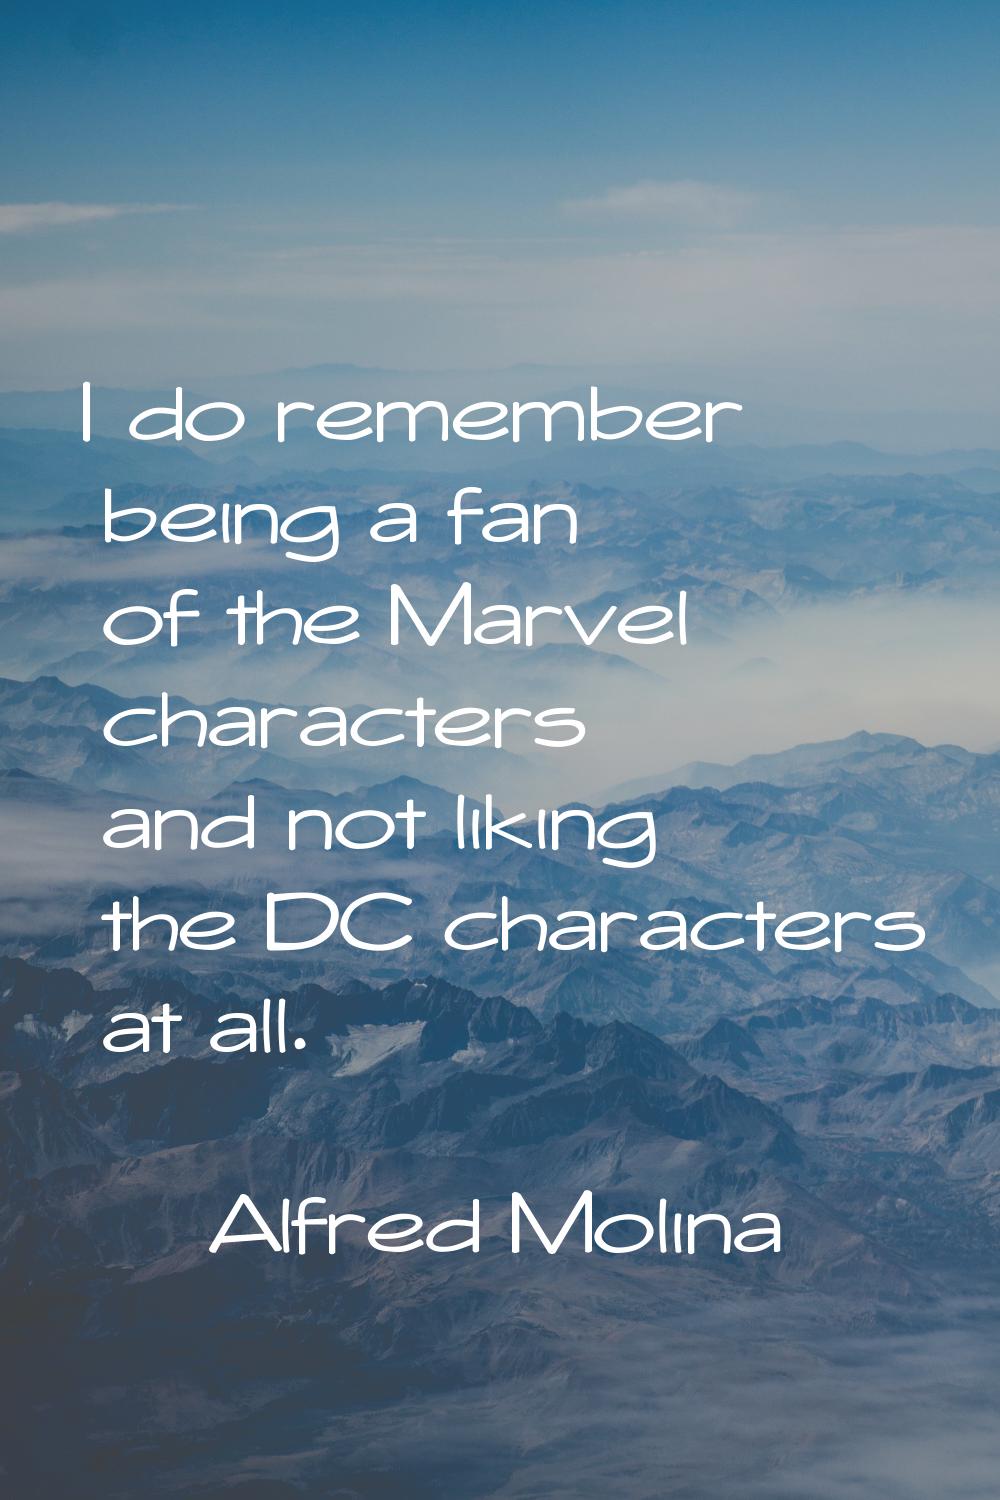 I do remember being a fan of the Marvel characters and not liking the DC characters at all.